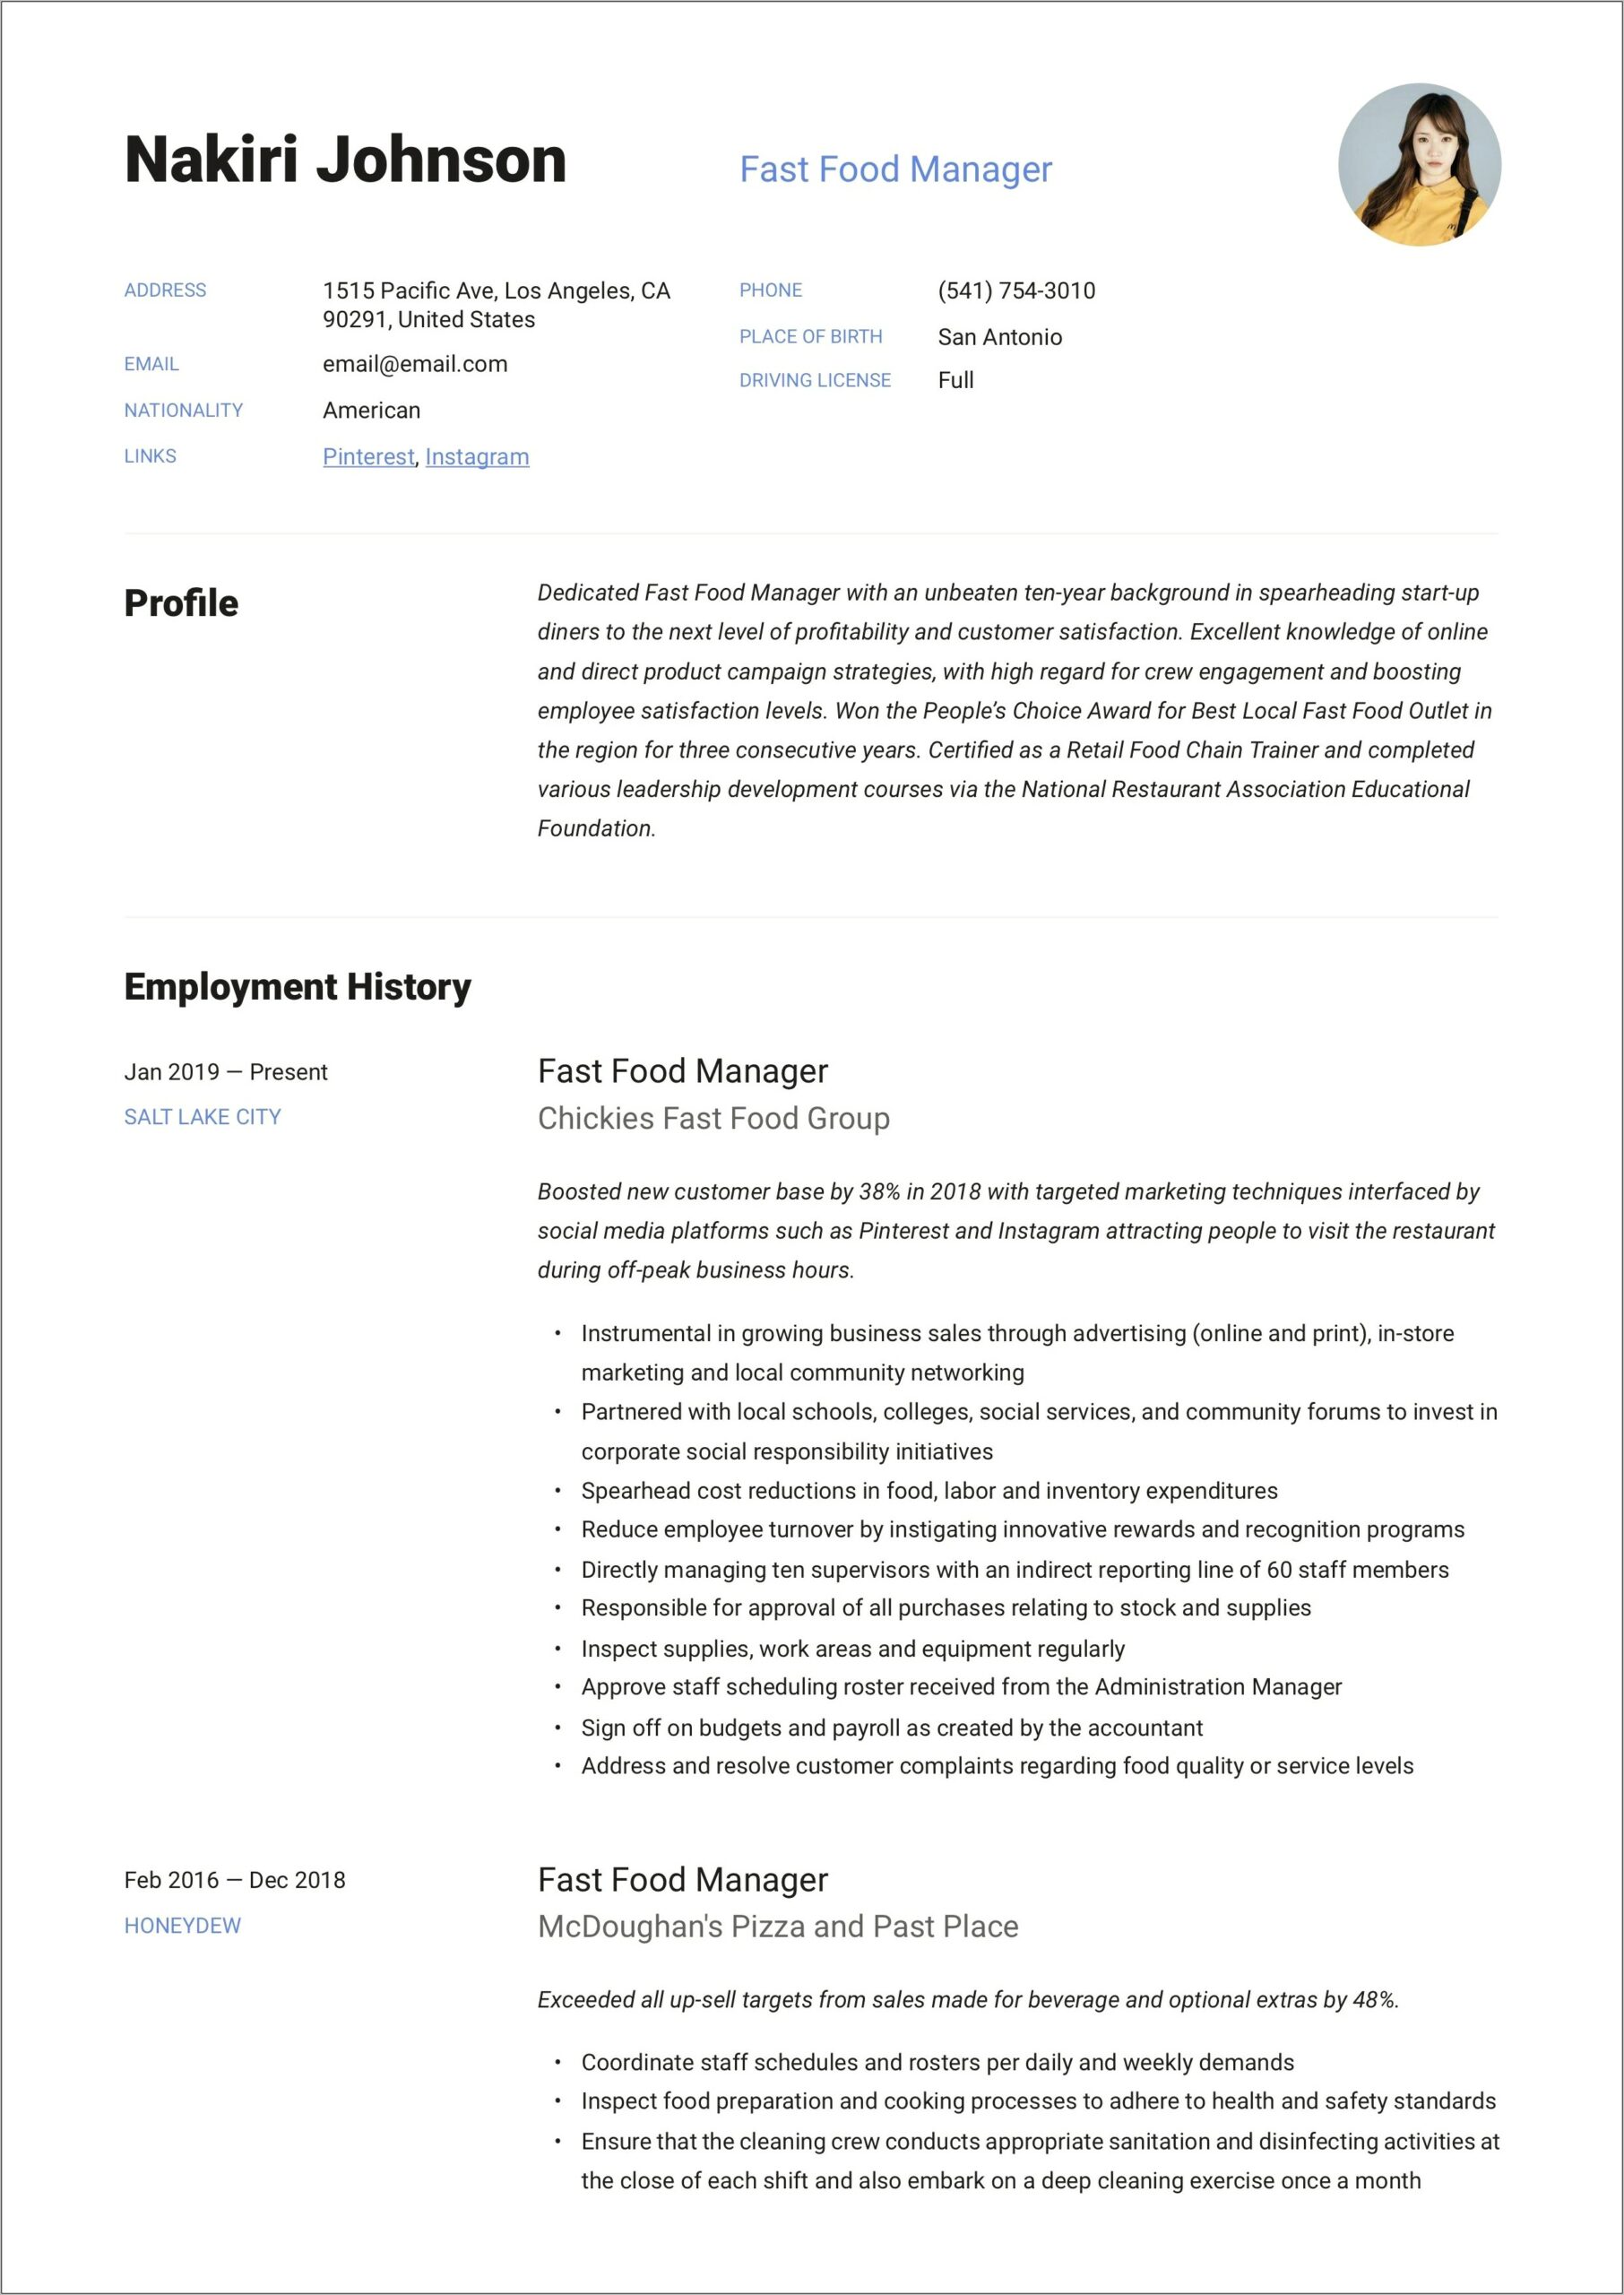 Fast Food Manager Skills To Put On Resume